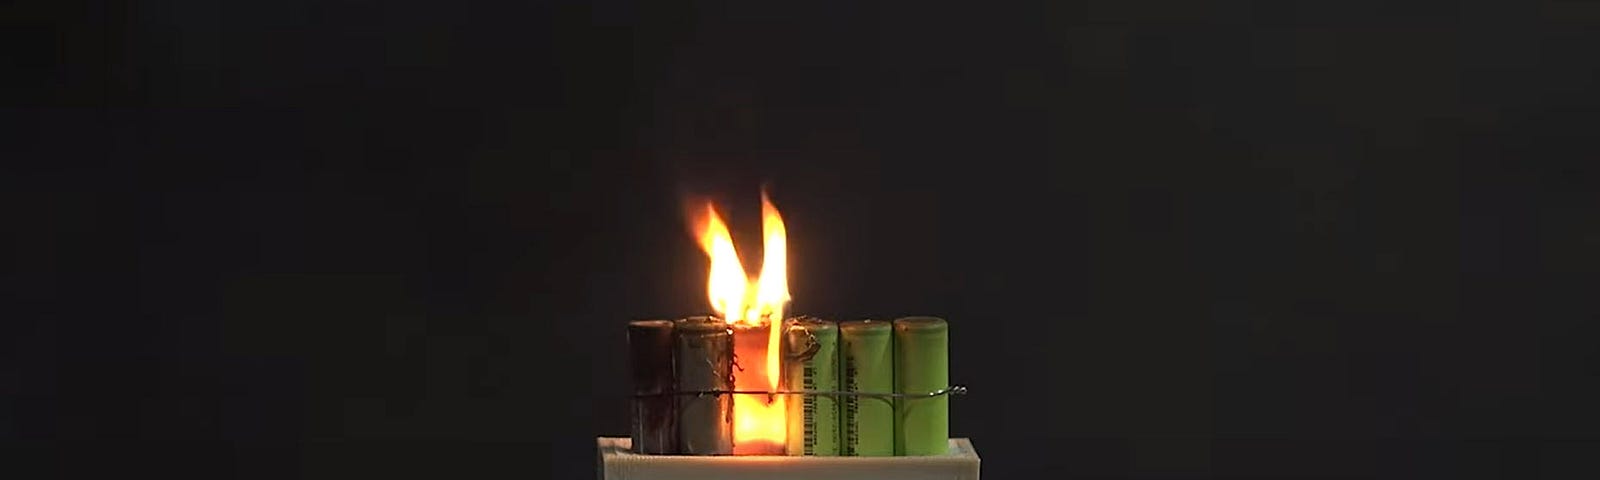 A lithium battery on fire